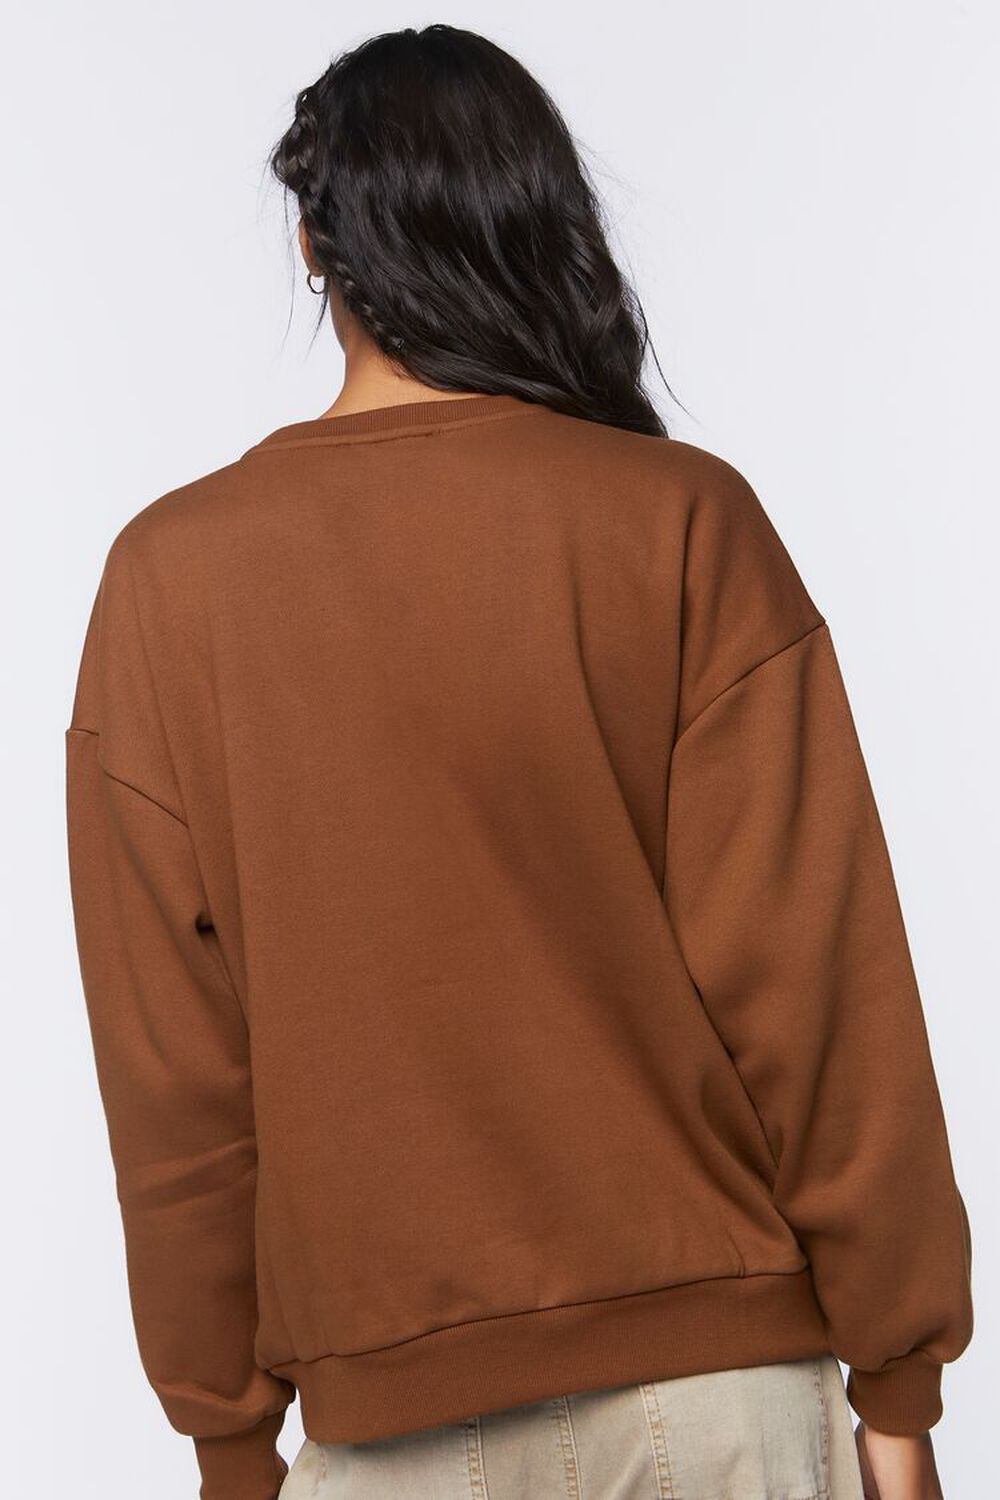 BROWN/MULTI NYC Graphic Pullover, image 3